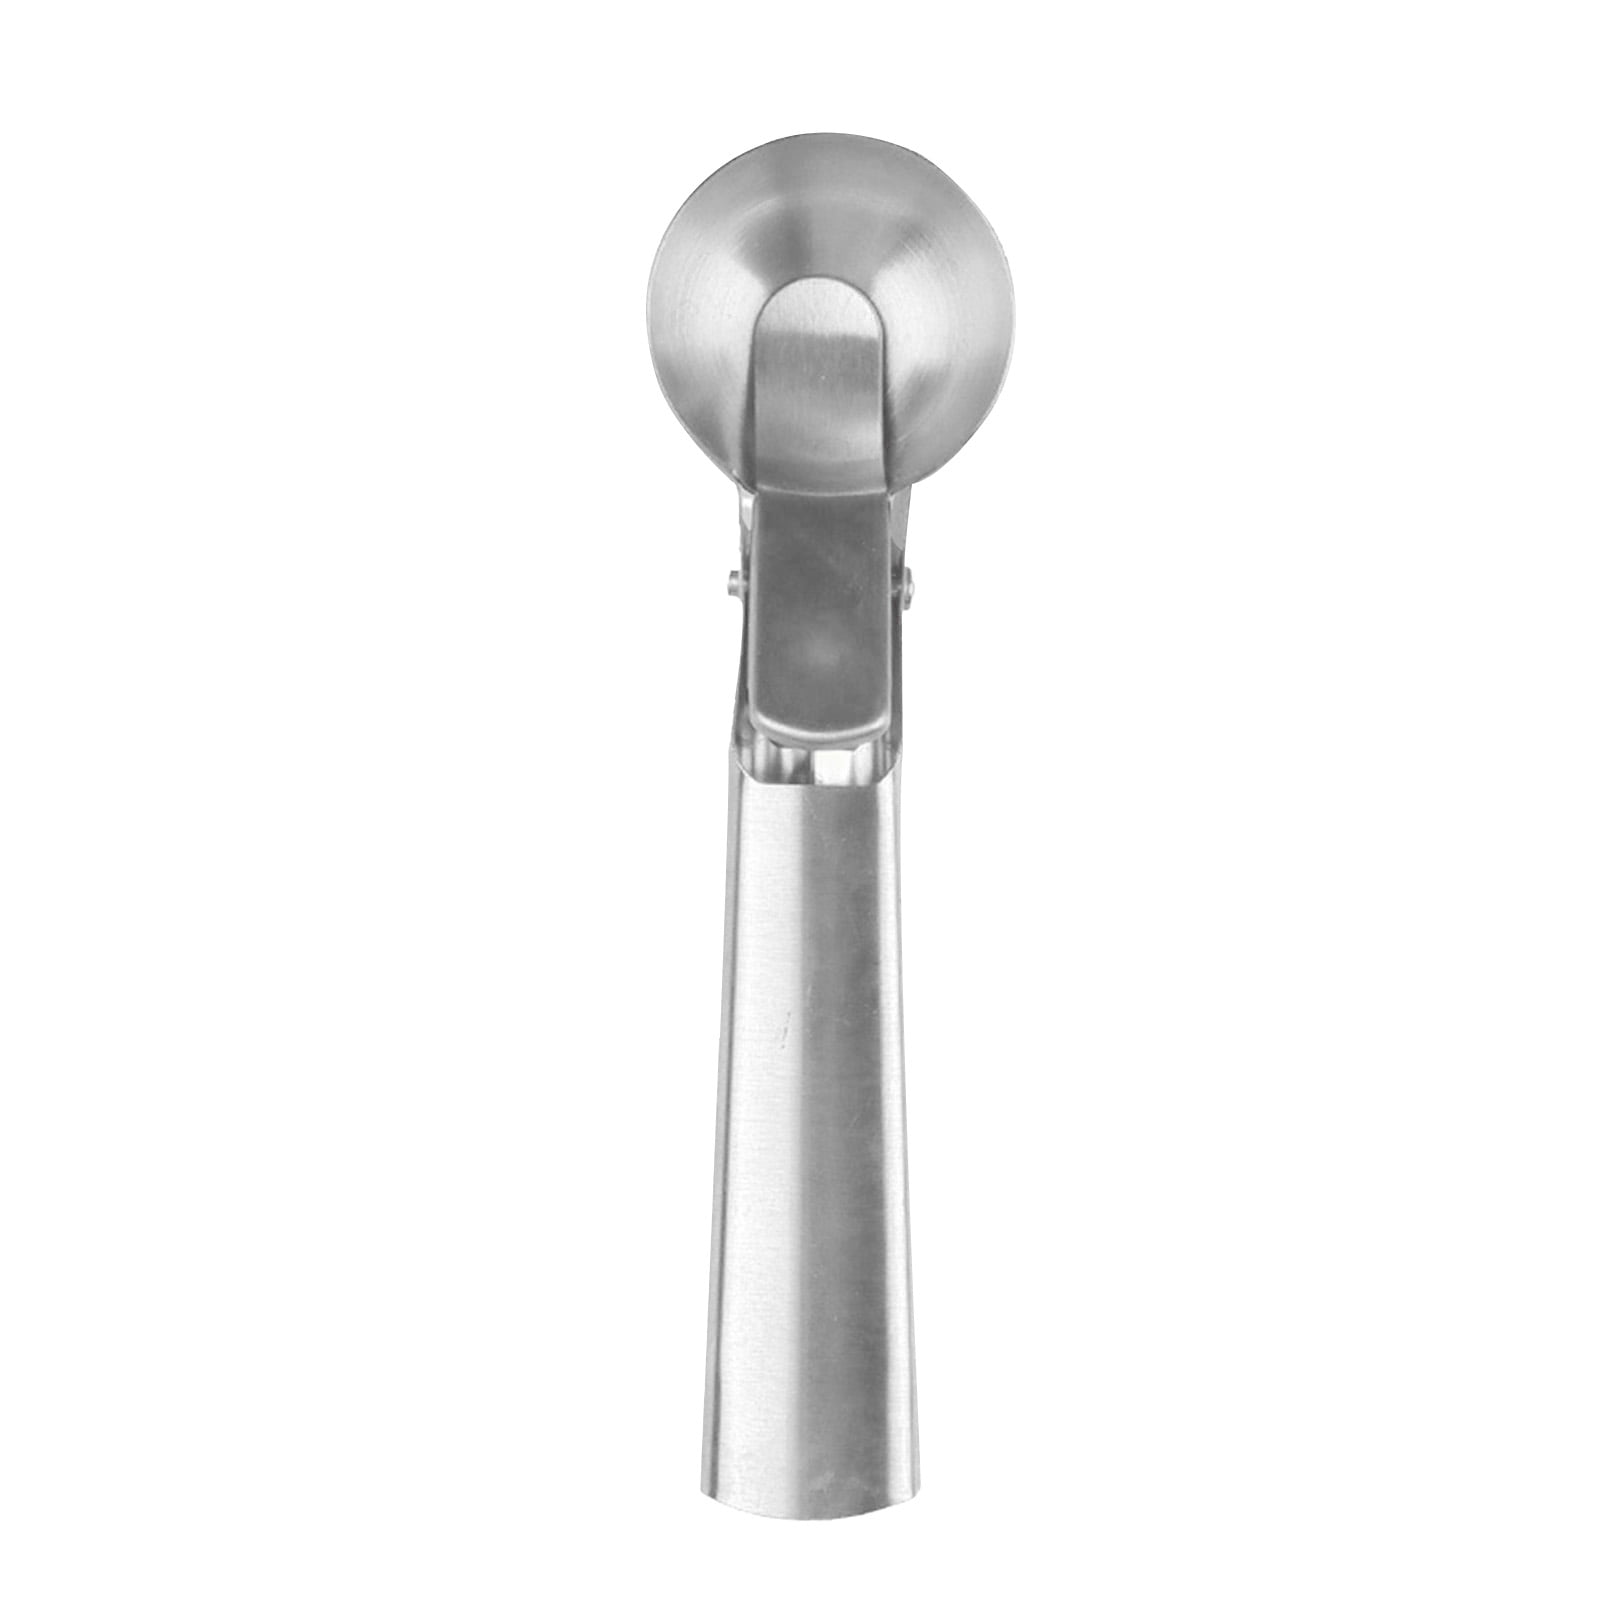  Winco Aluminum Utility Scoop, 12-Ounce, Medium: Commercial Food  Scoops: Home & Kitchen